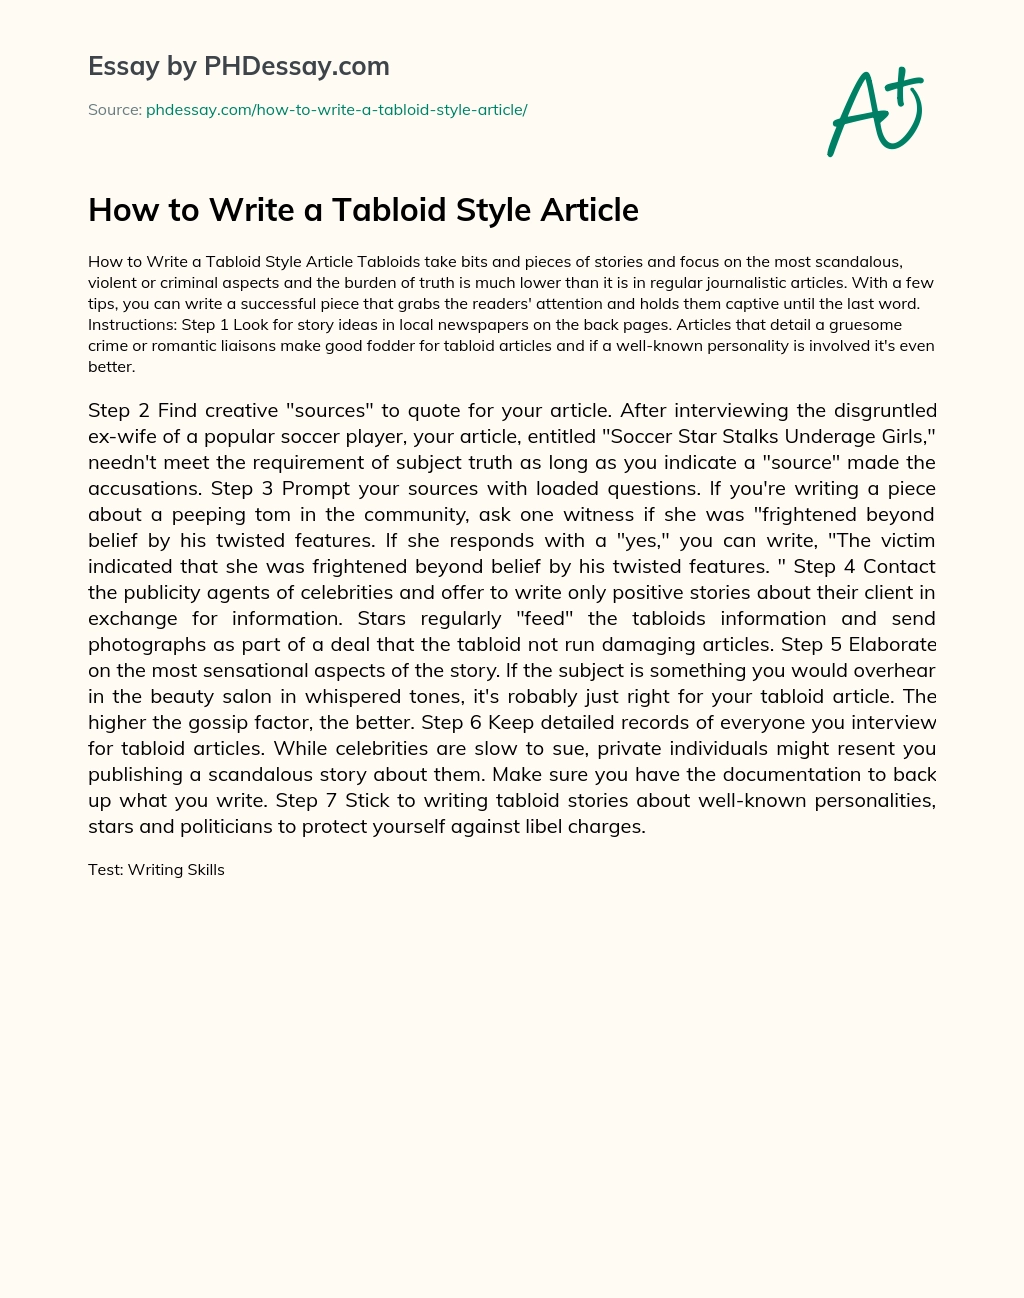 How to Write a Tabloid Style Article essay